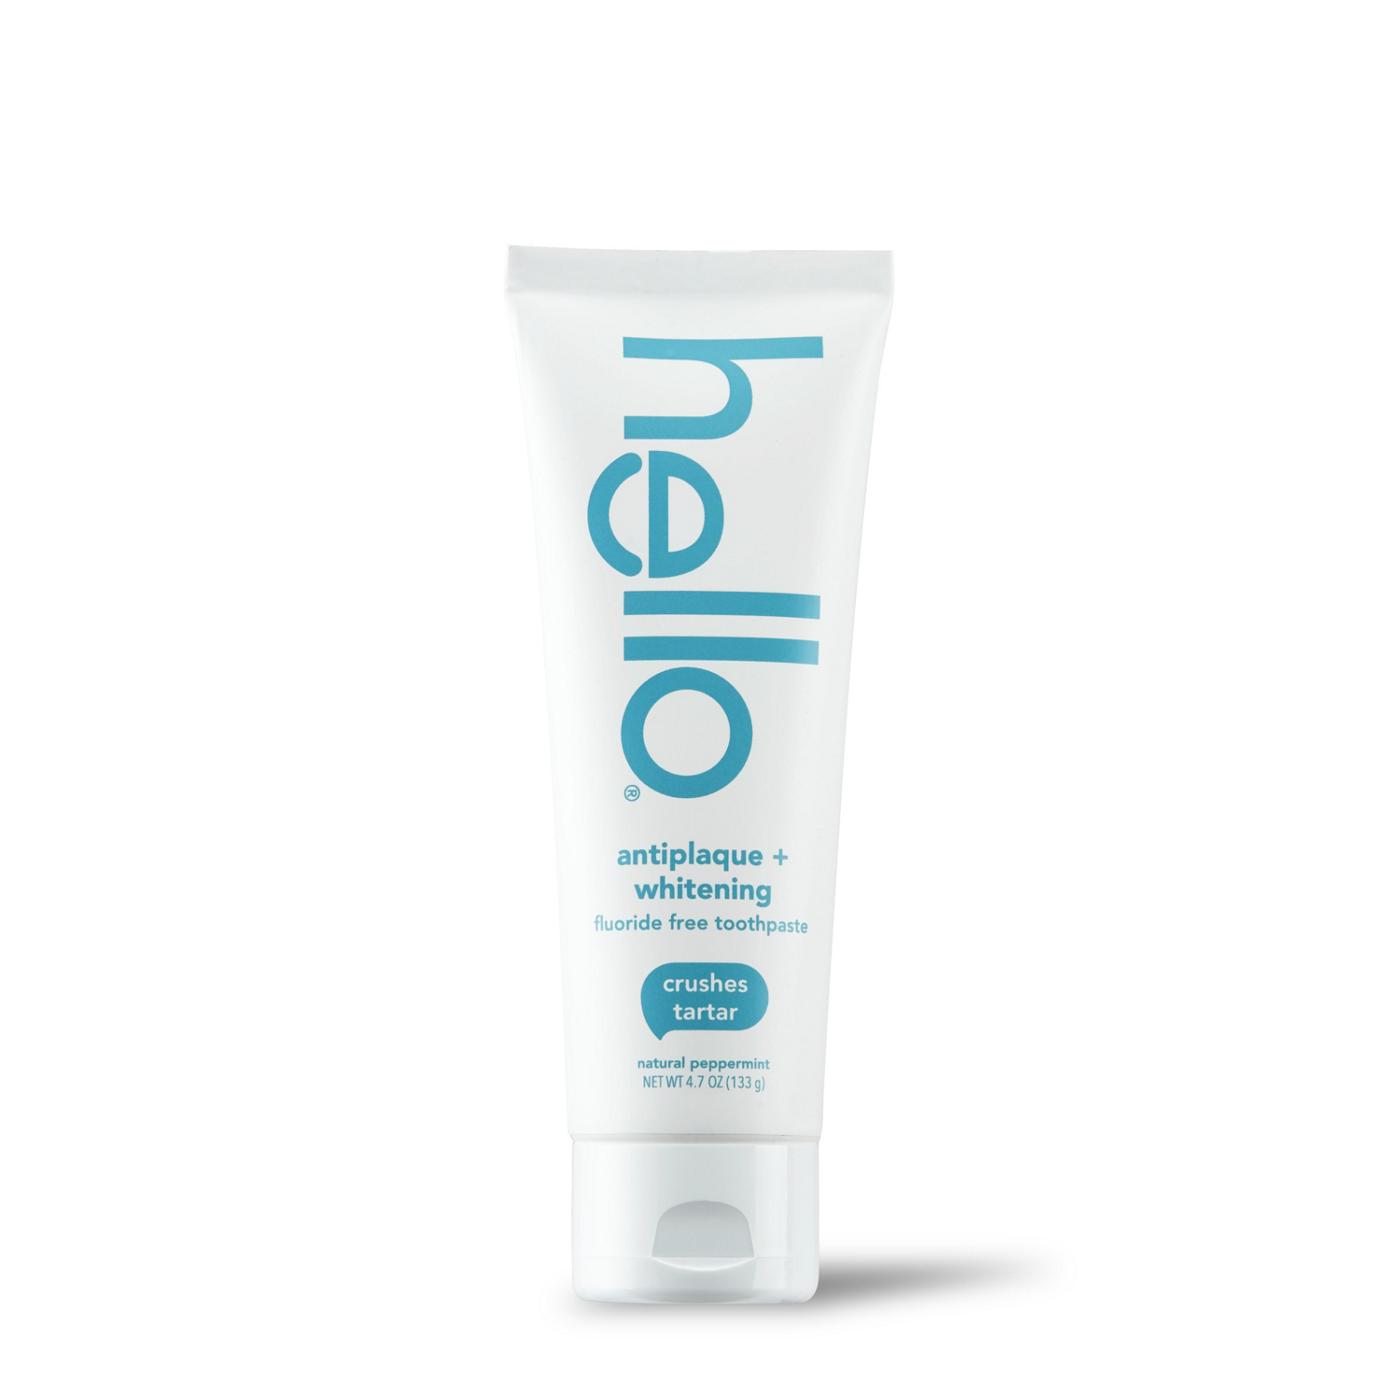 hello Antiplaque + Whitening Fluoride Free Toothpaste - Natural Peppermint; image 7 of 10